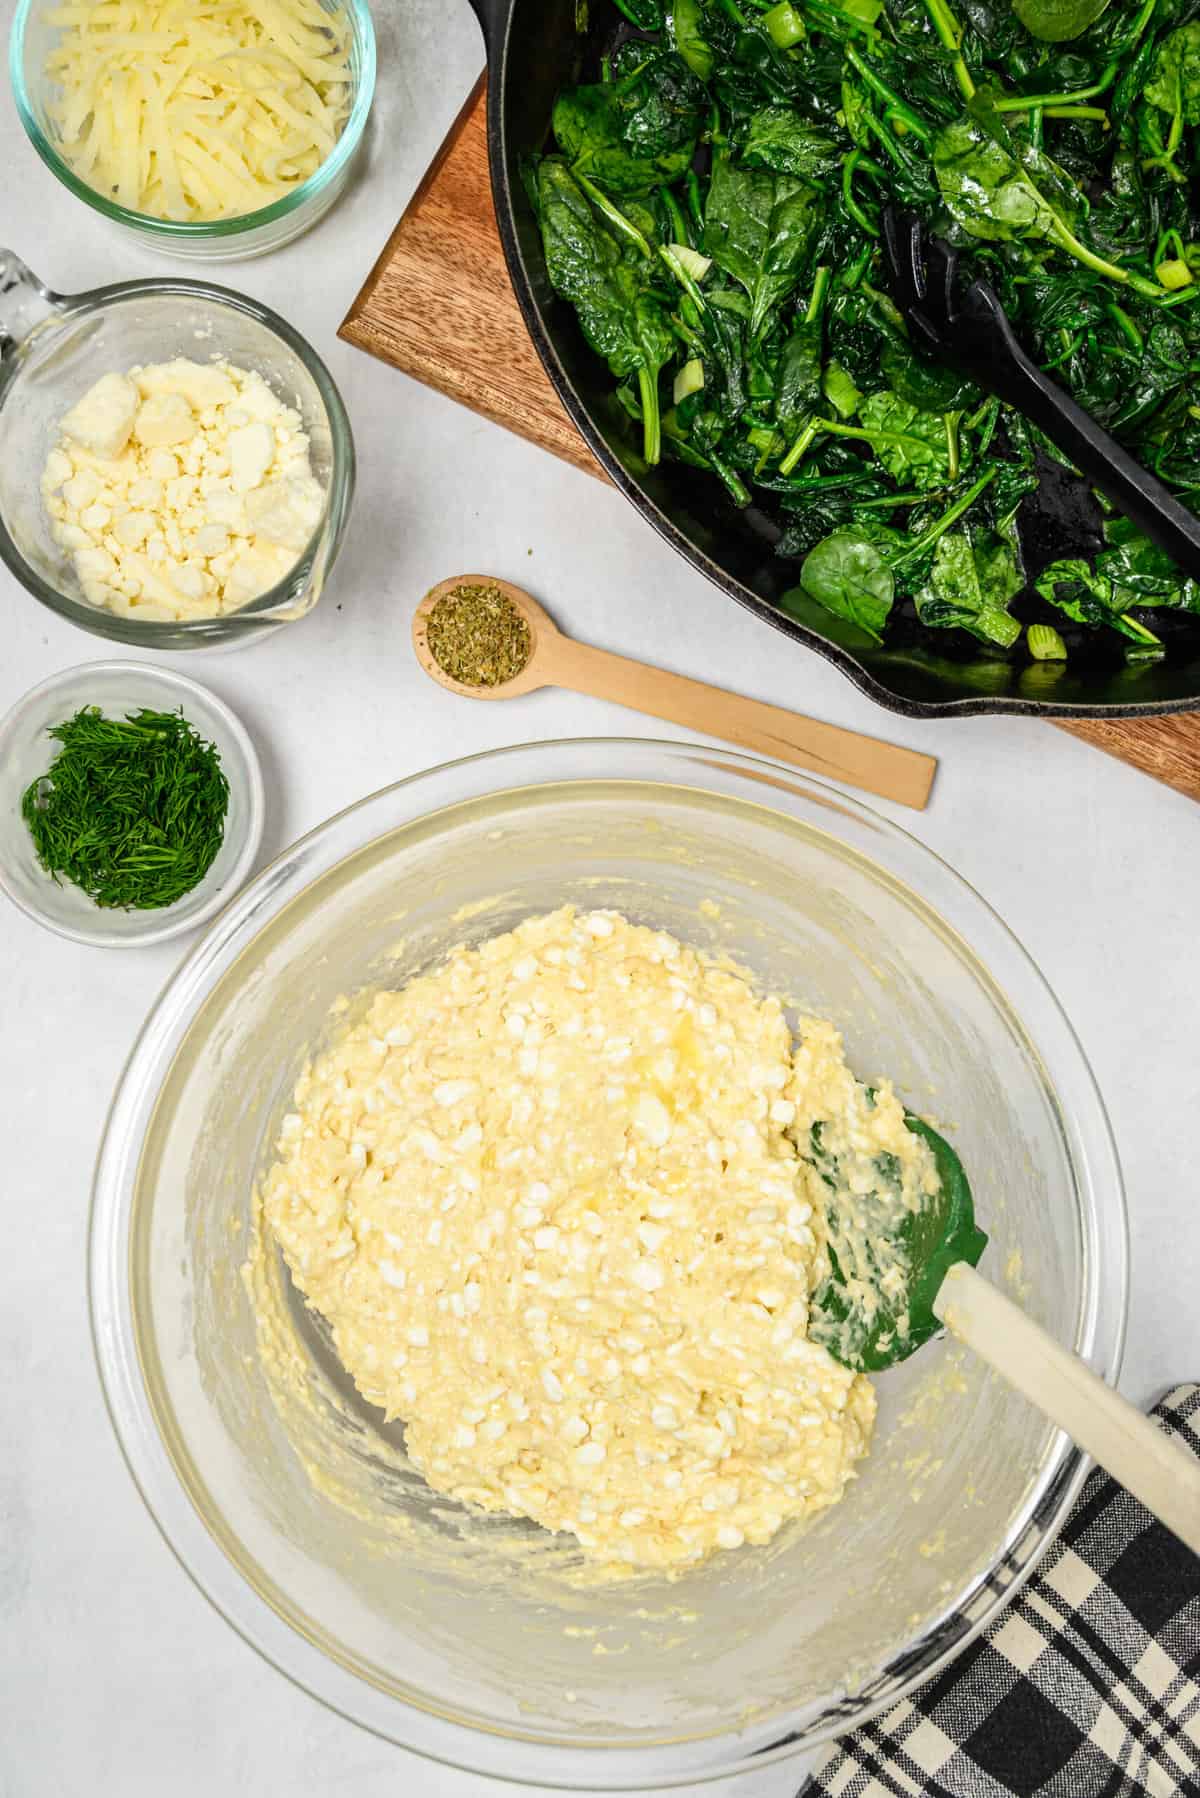 The ingredients for spinach casserole are being mixed in a large bowl.